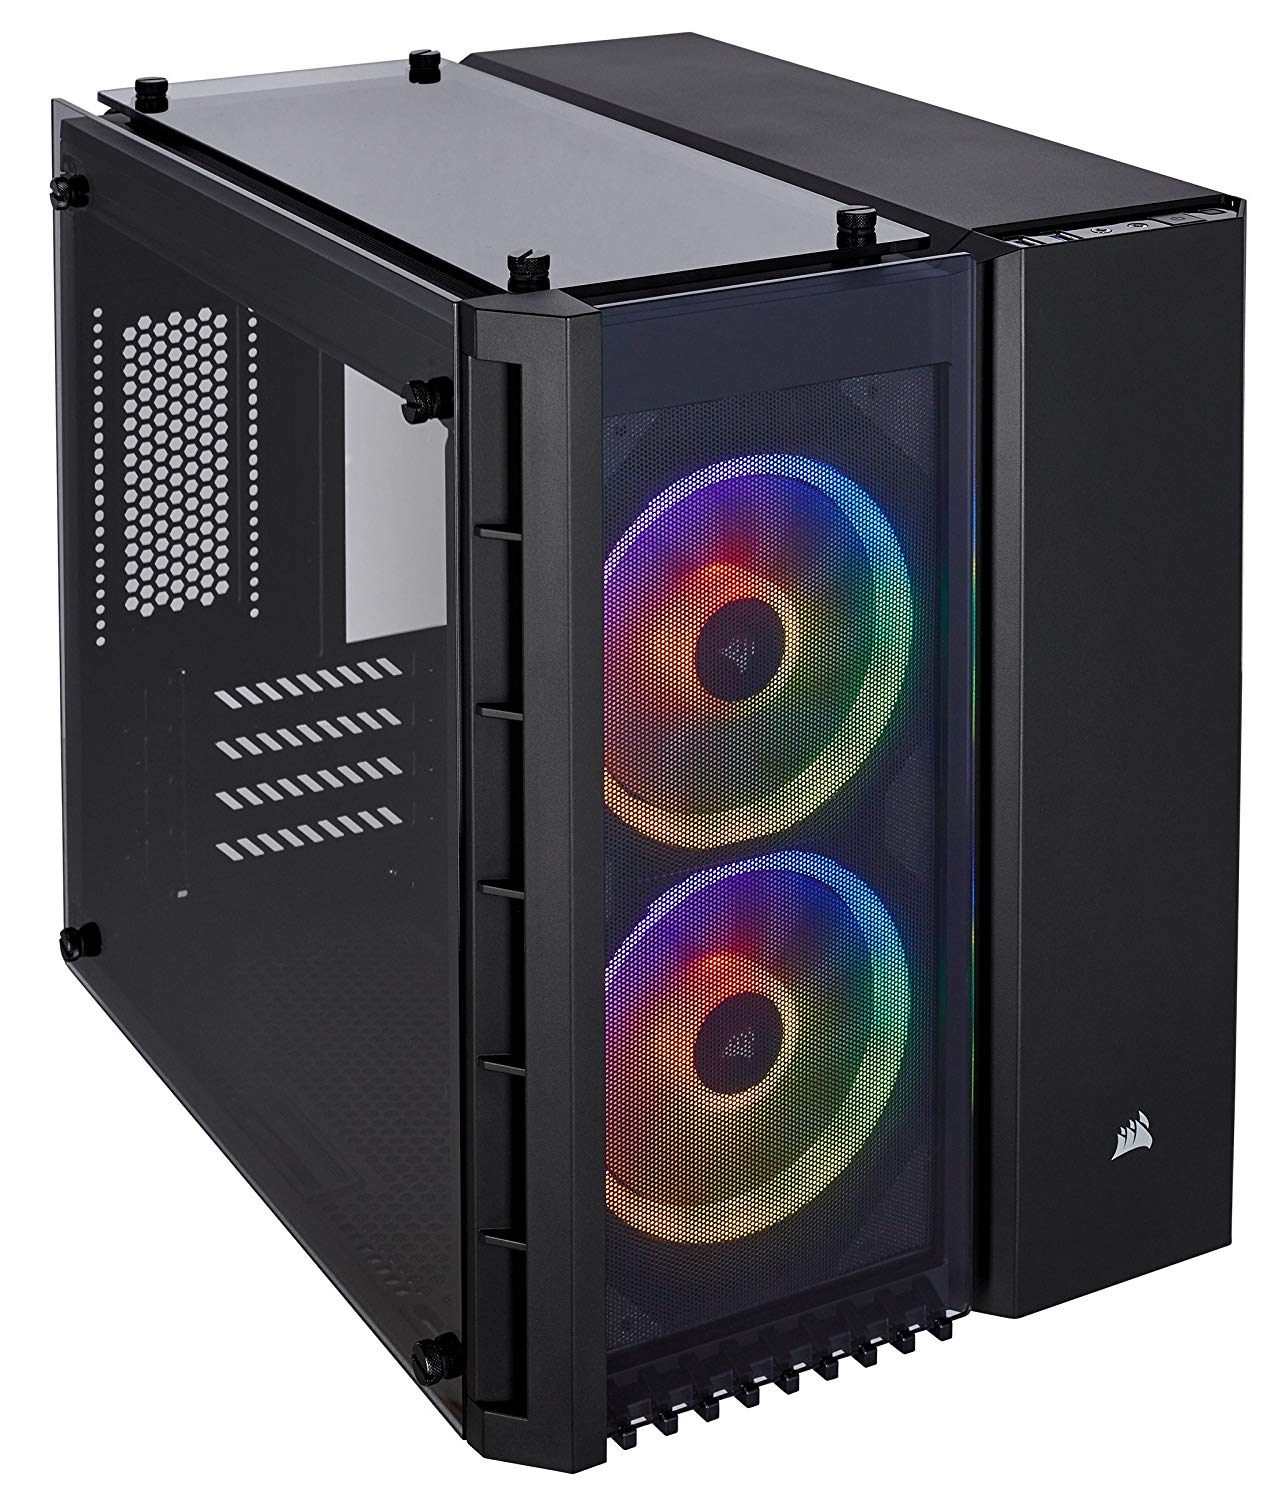 Best Mini ITX Cases To Build Your Dream Computer Yournabe